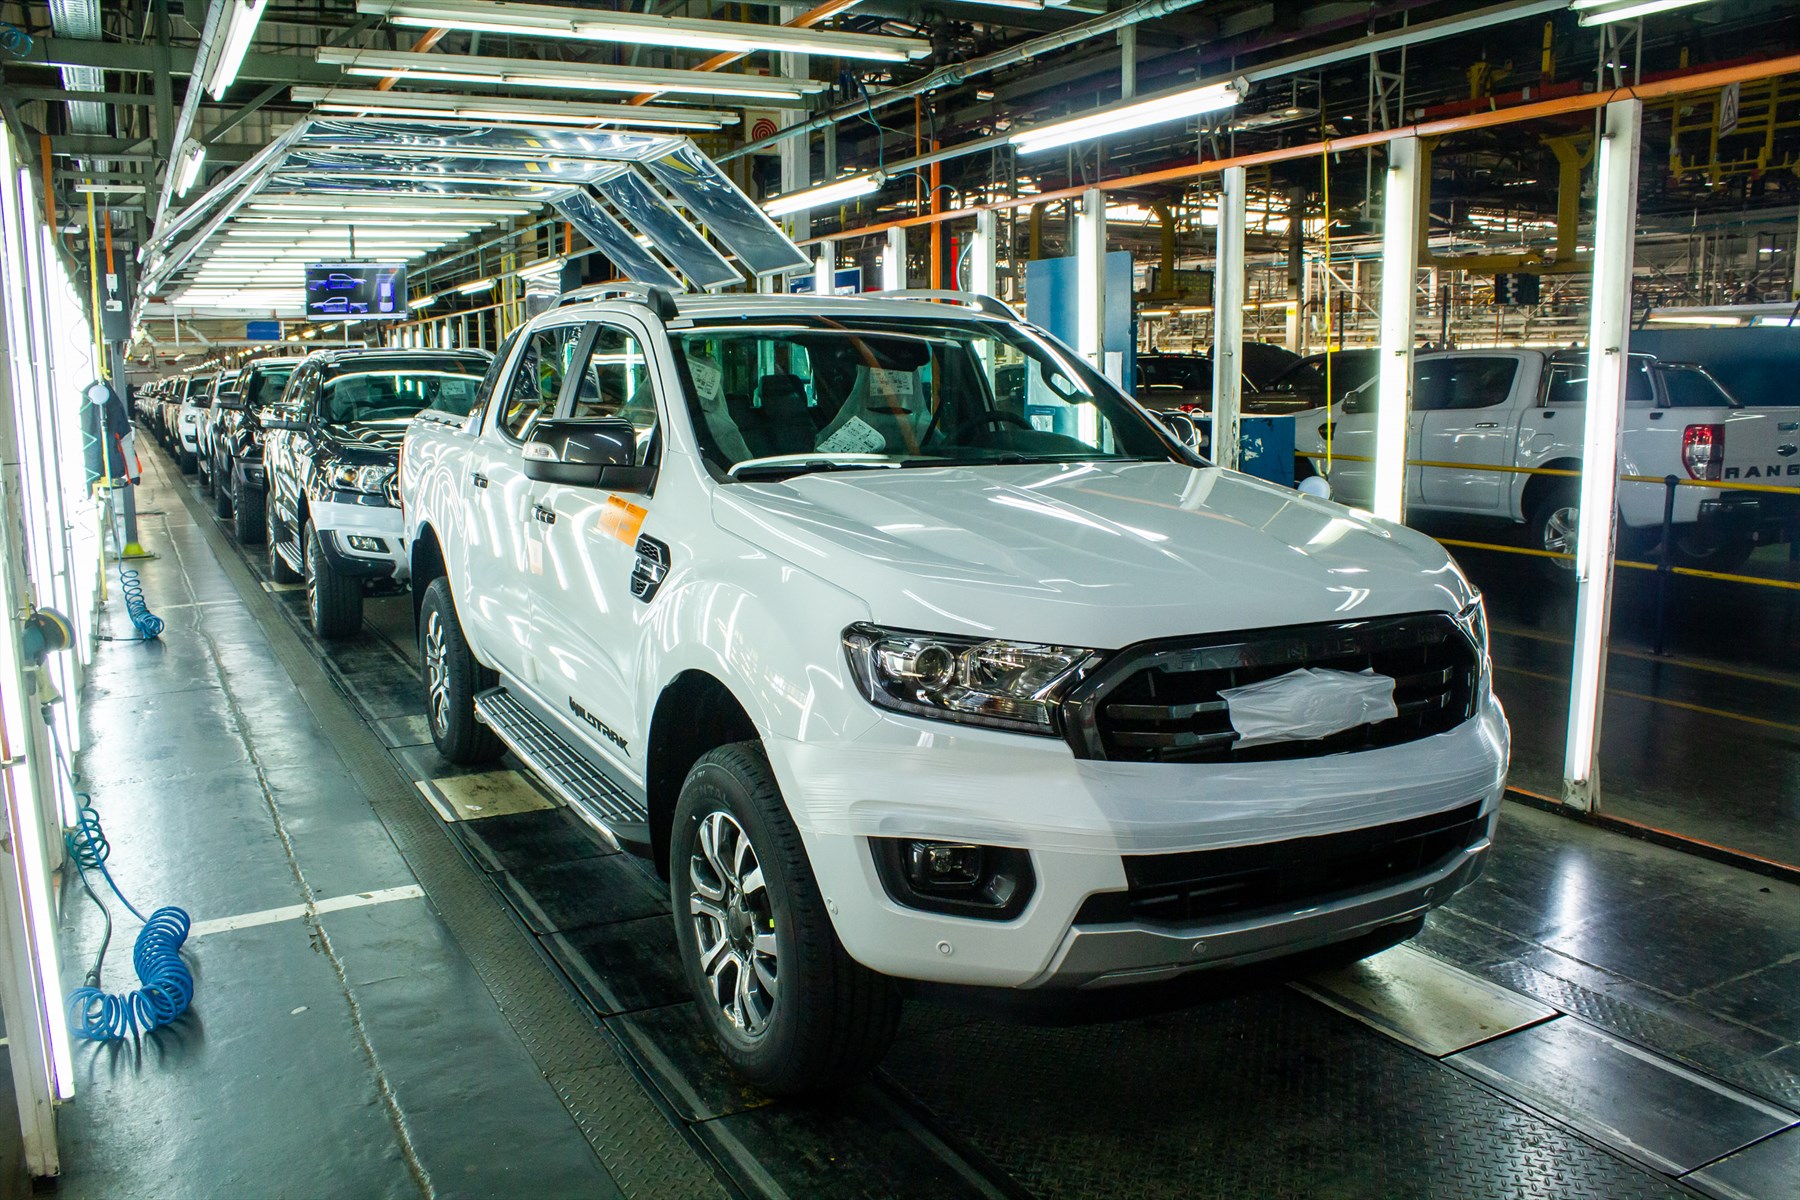 Ford Begins Phased Production and Operations Restart in South Africa on 1 June with Enhanced Safety Protocols